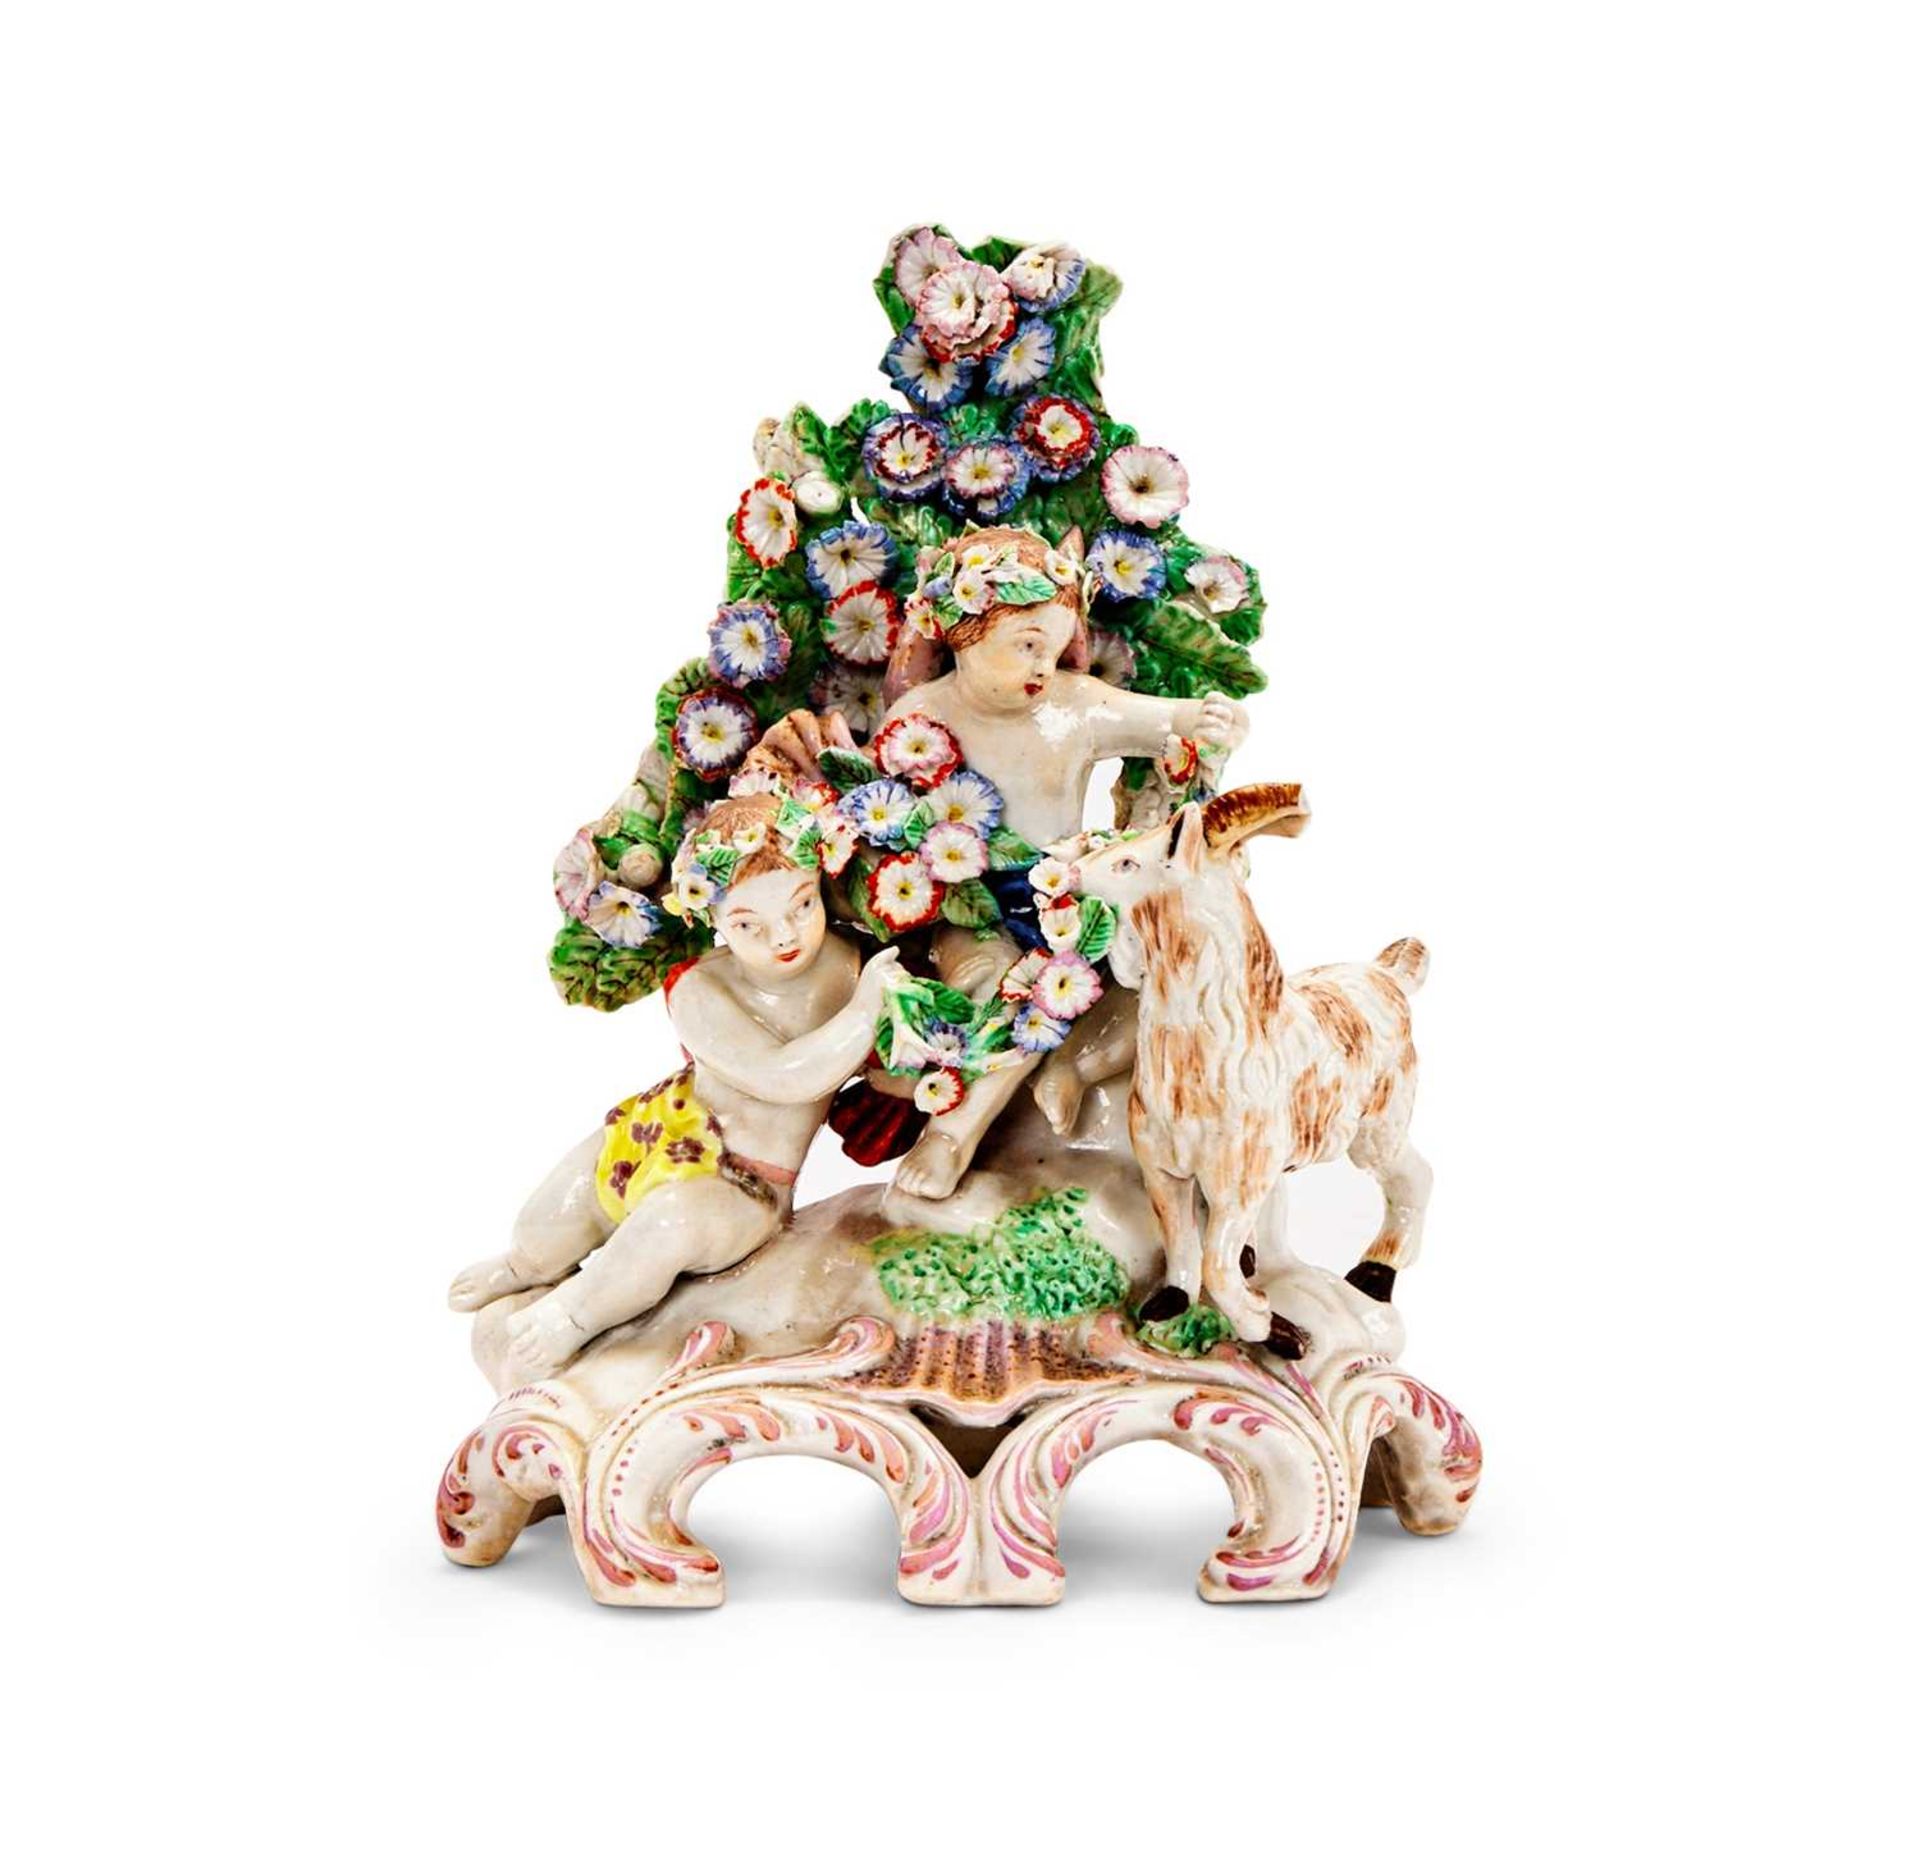 A 18TH CENTURY STYLE PORCELAIN FIGURAL BOCAGE GROUP IN THE MANNER OF BOW